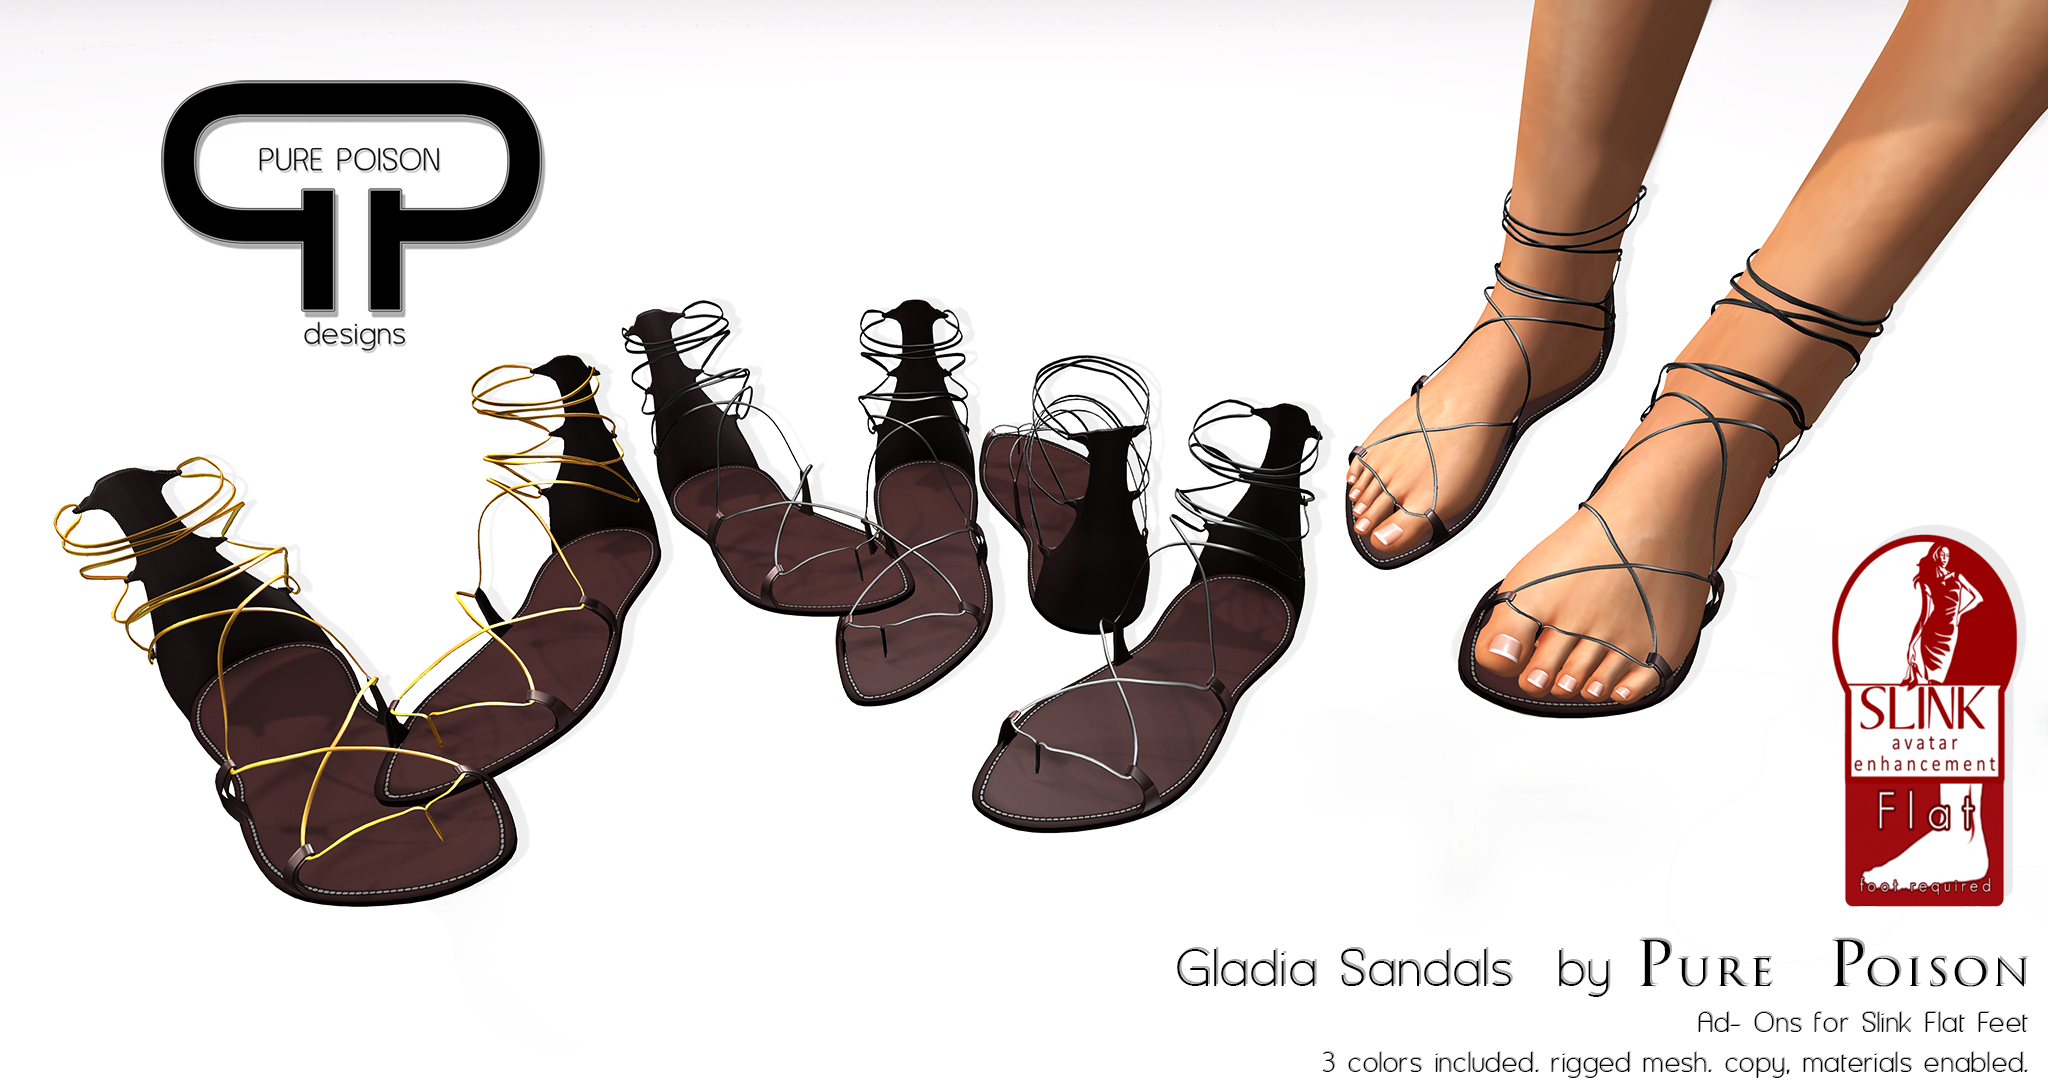 Pure Poison – Gladia Sandals – Ad – Ons for Slink Flat Feet – Feet NOT Included